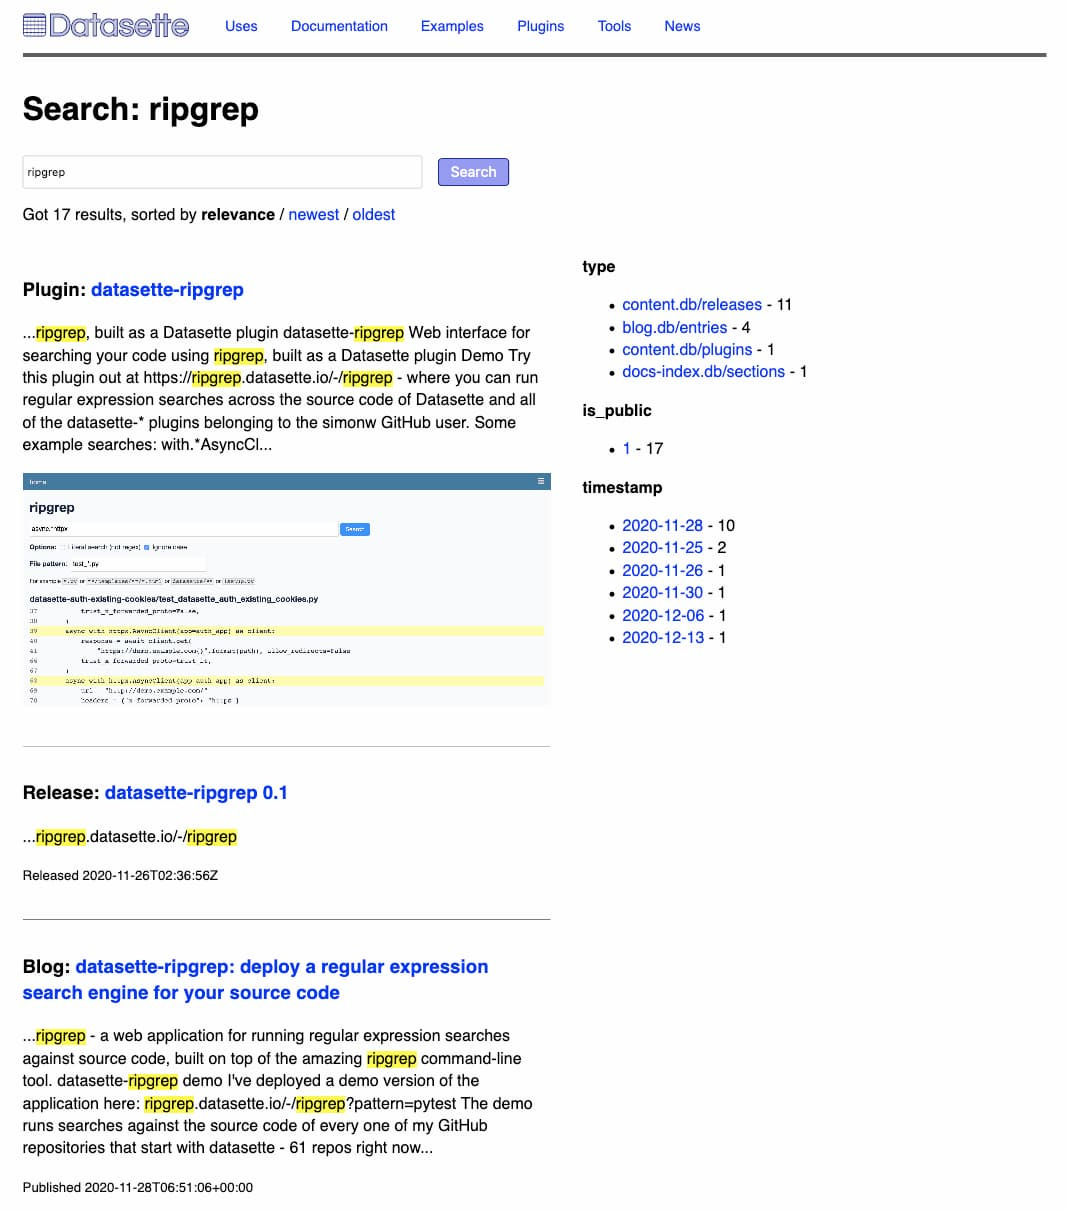 A screenshot of dogsheep.io search results for ripgrep